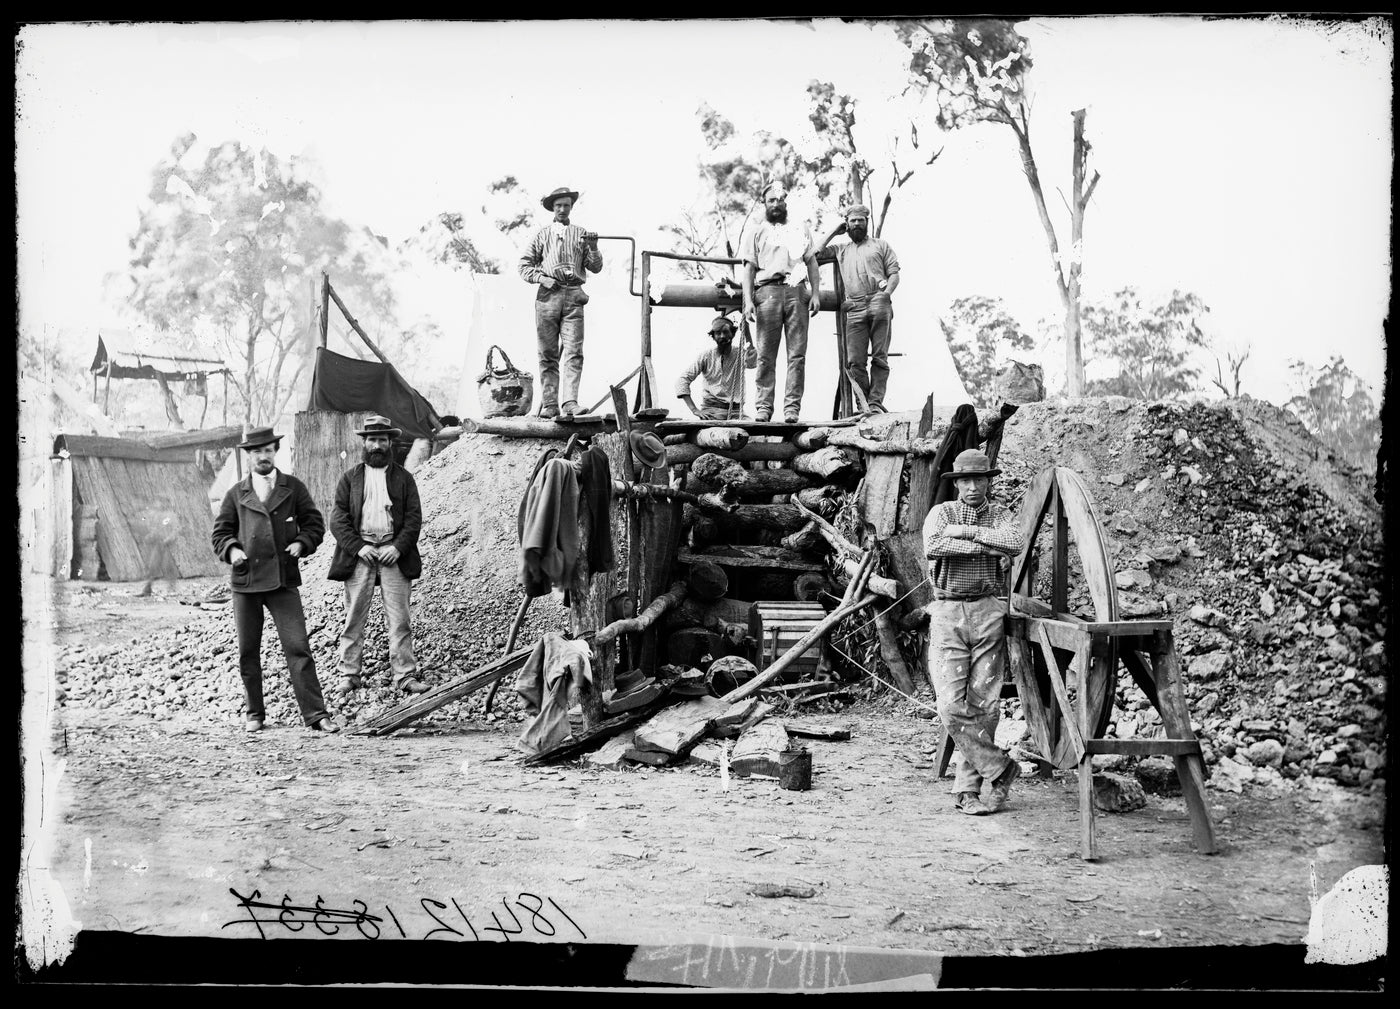 Mine head & group of gold miners, Gulgong area - c1870-1875 - Gold Rush - Mitchell Library, State Library of New South Wales - The Holterman Collection